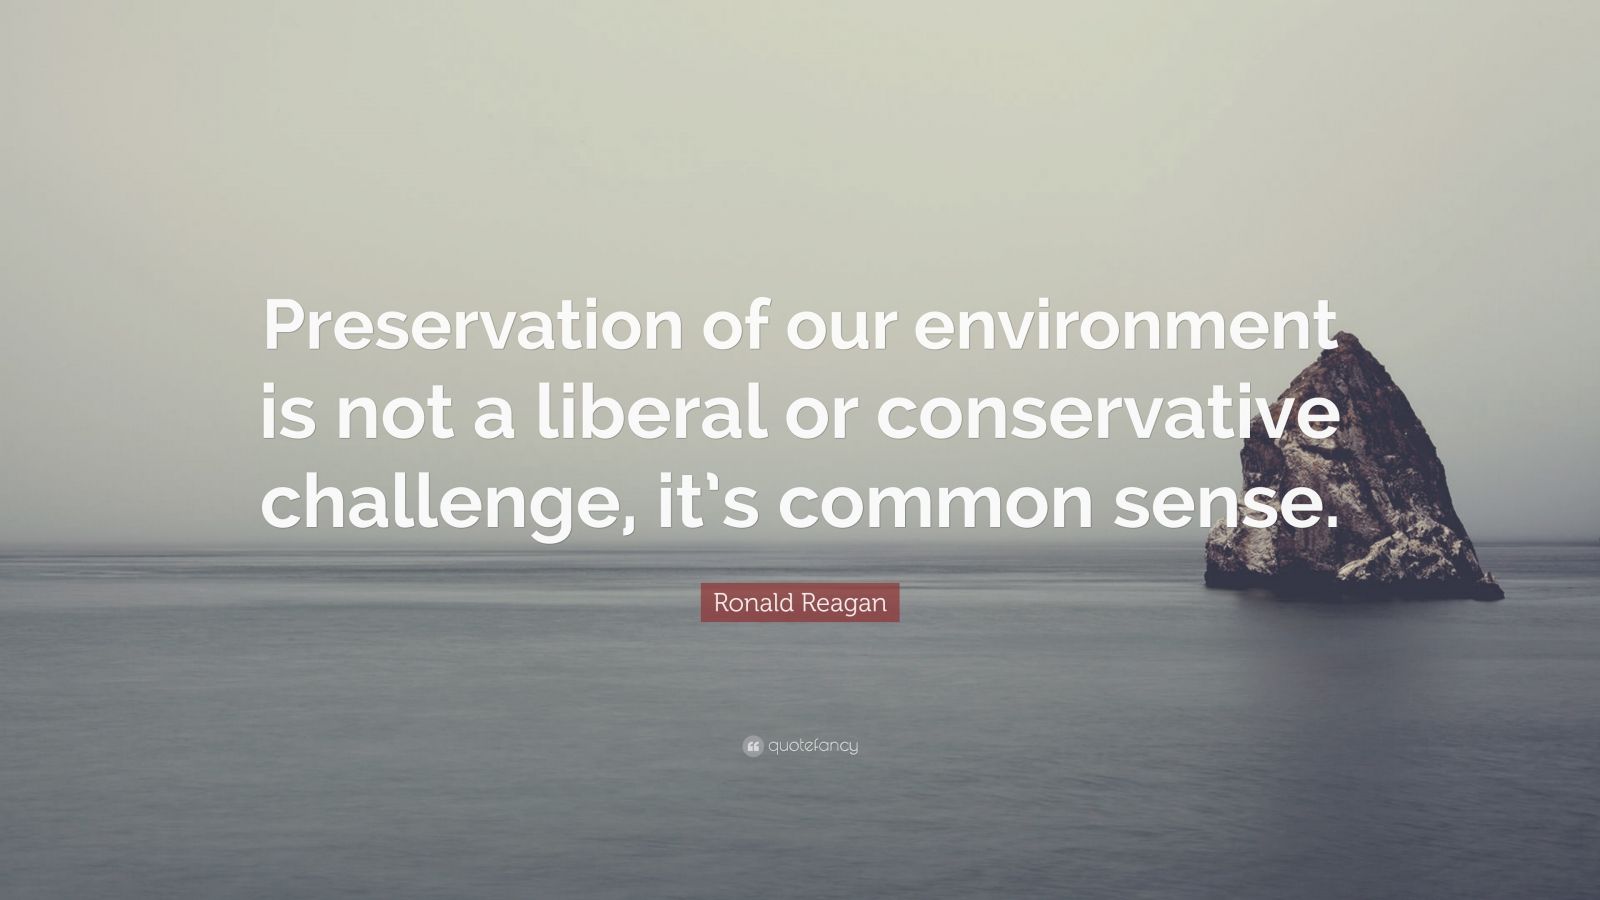 Ronald Reagan Quote: “Preservation of our environment is not a liberal